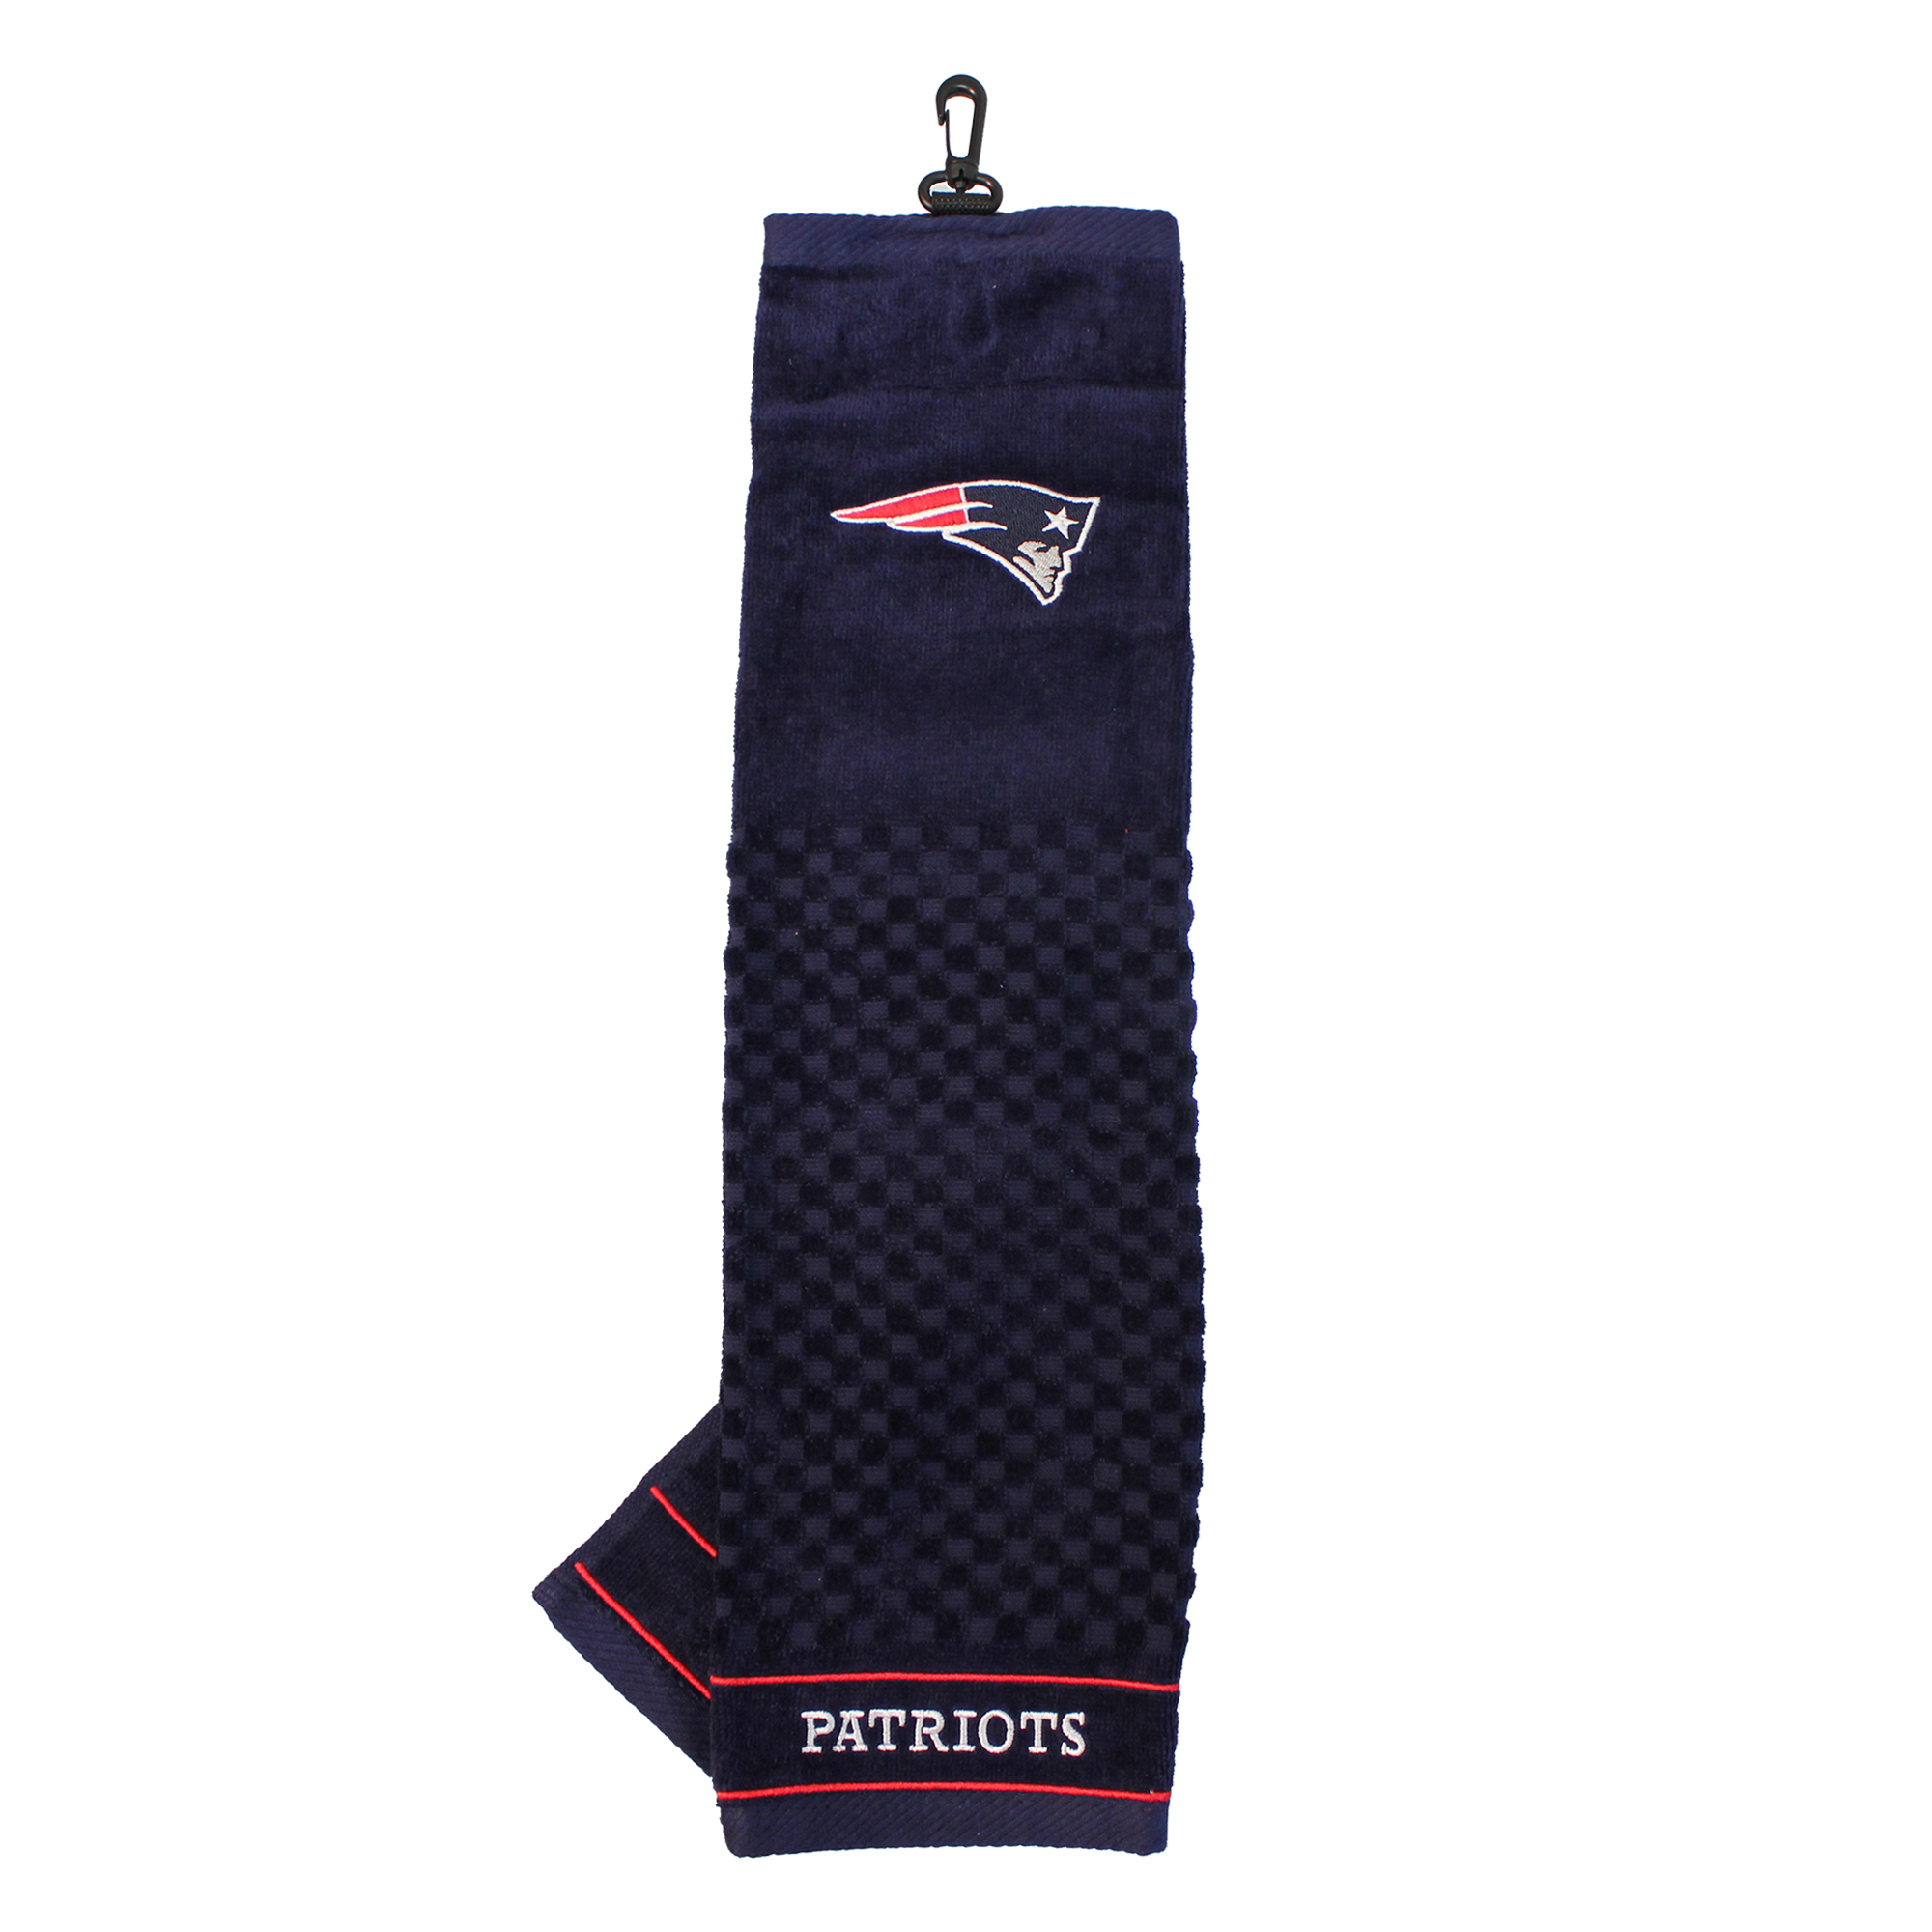 New England Patriots Embroidered Towel